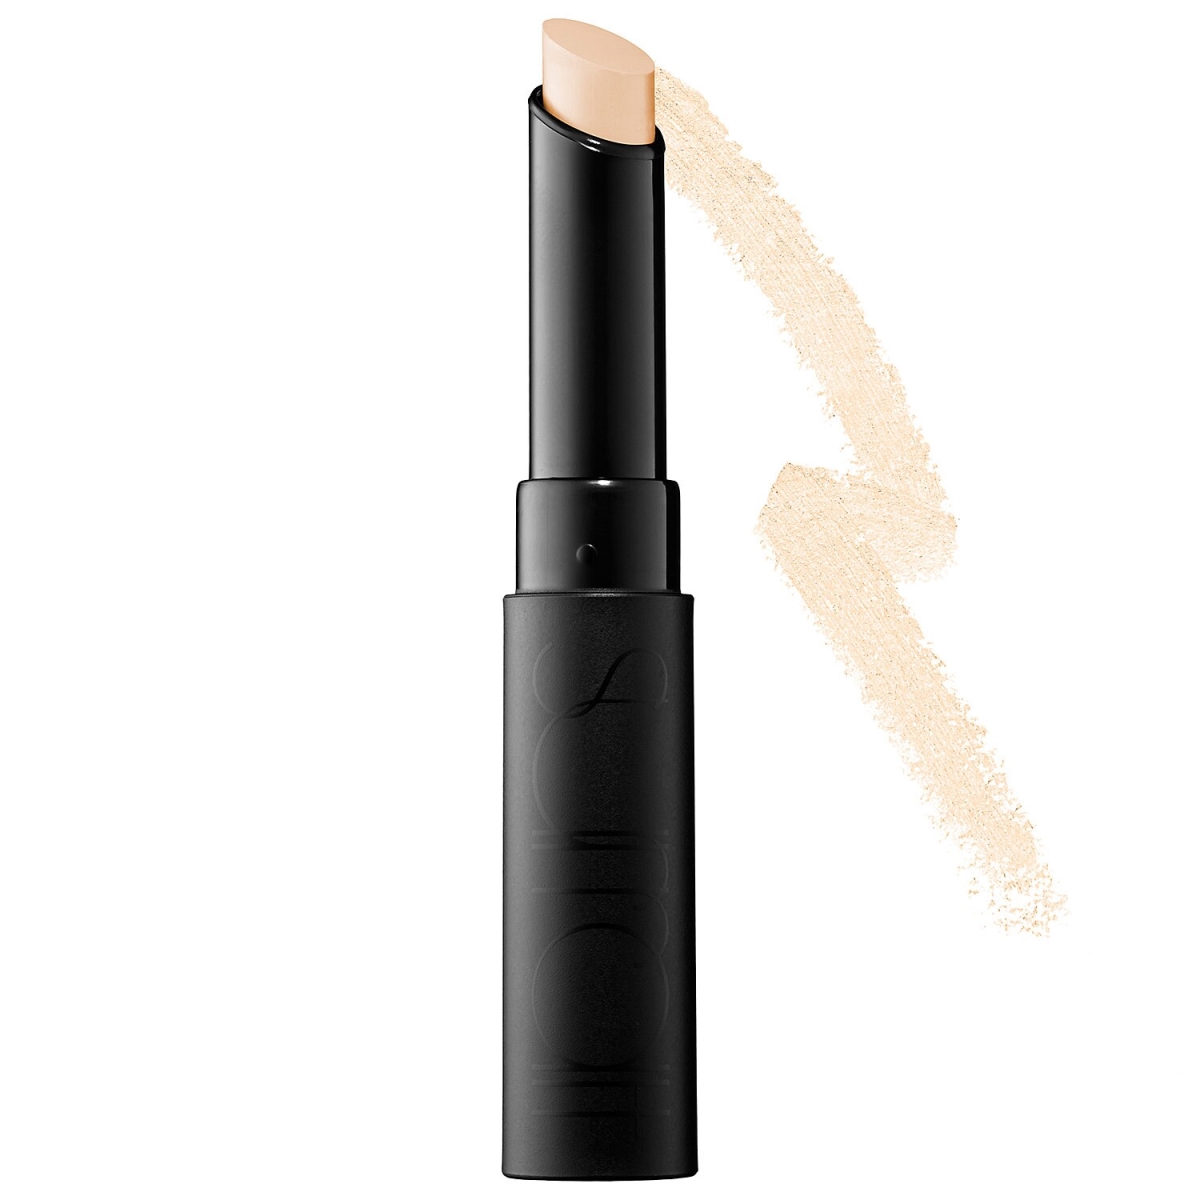 Picture of Surratt Beauty 244788 Surreal Skin Concealer - No.2 Fair to Light with Neutral Undertones - 0.06 oz